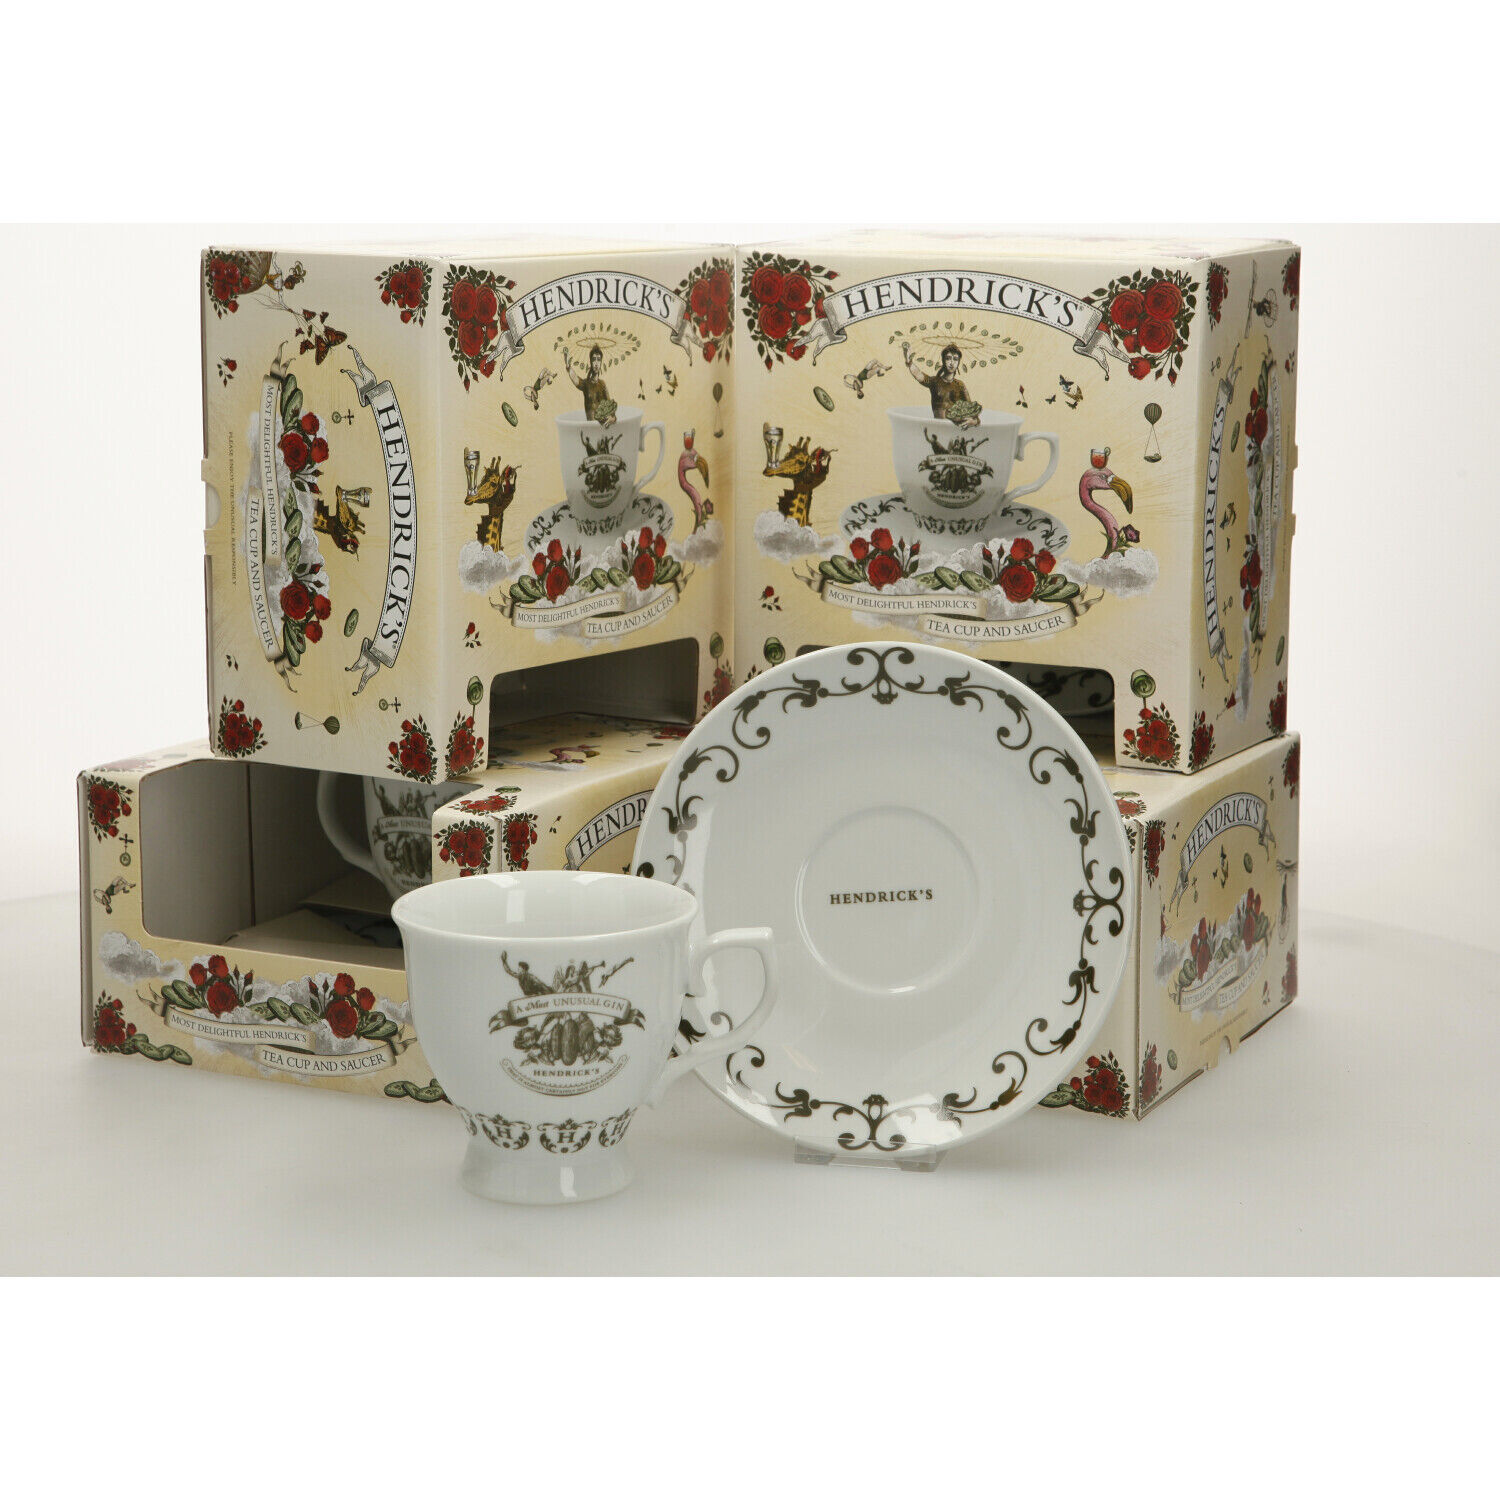 4 x  Hendricks Gin Tea Cup And Saucer Brand New In Box 